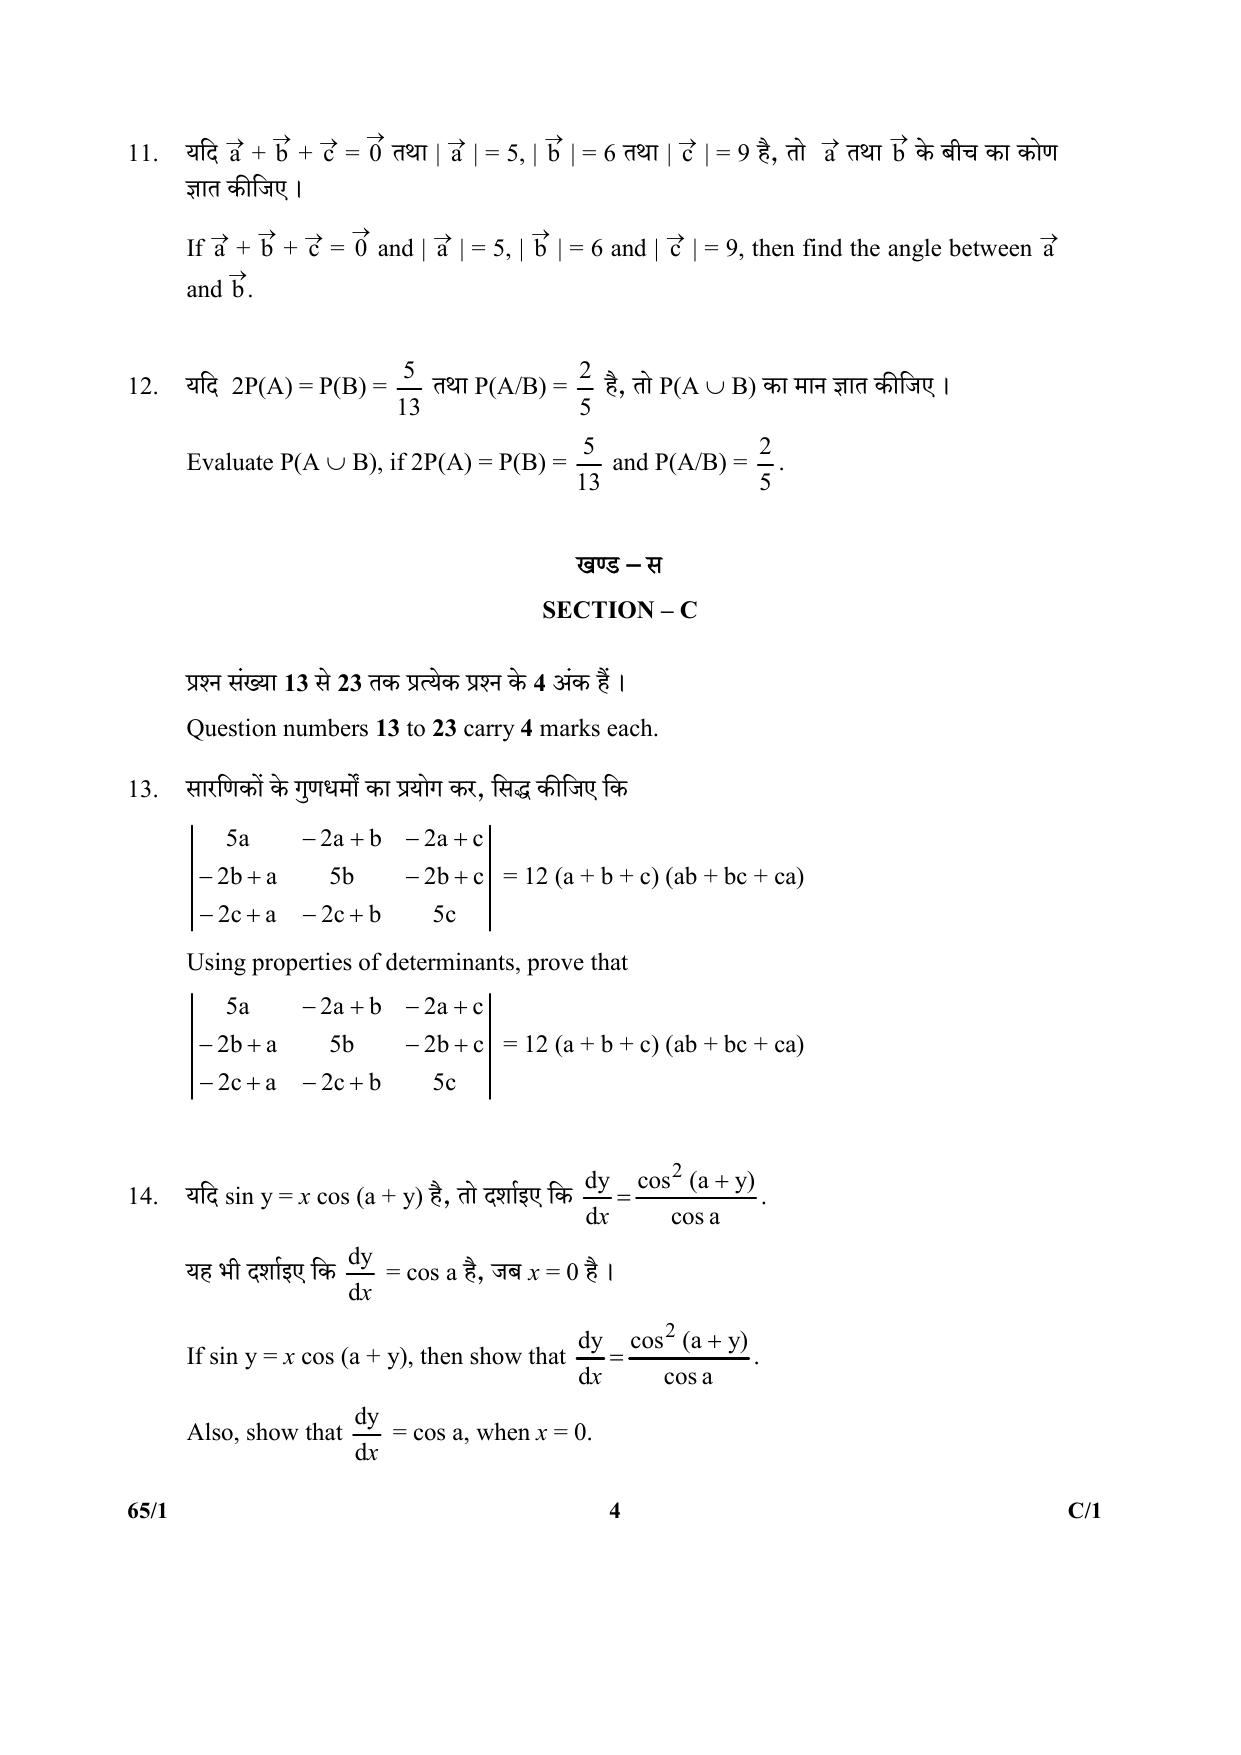 CBSE Class 12 65-1 (Mathematics) 2018 Compartment Question Paper - Page 4